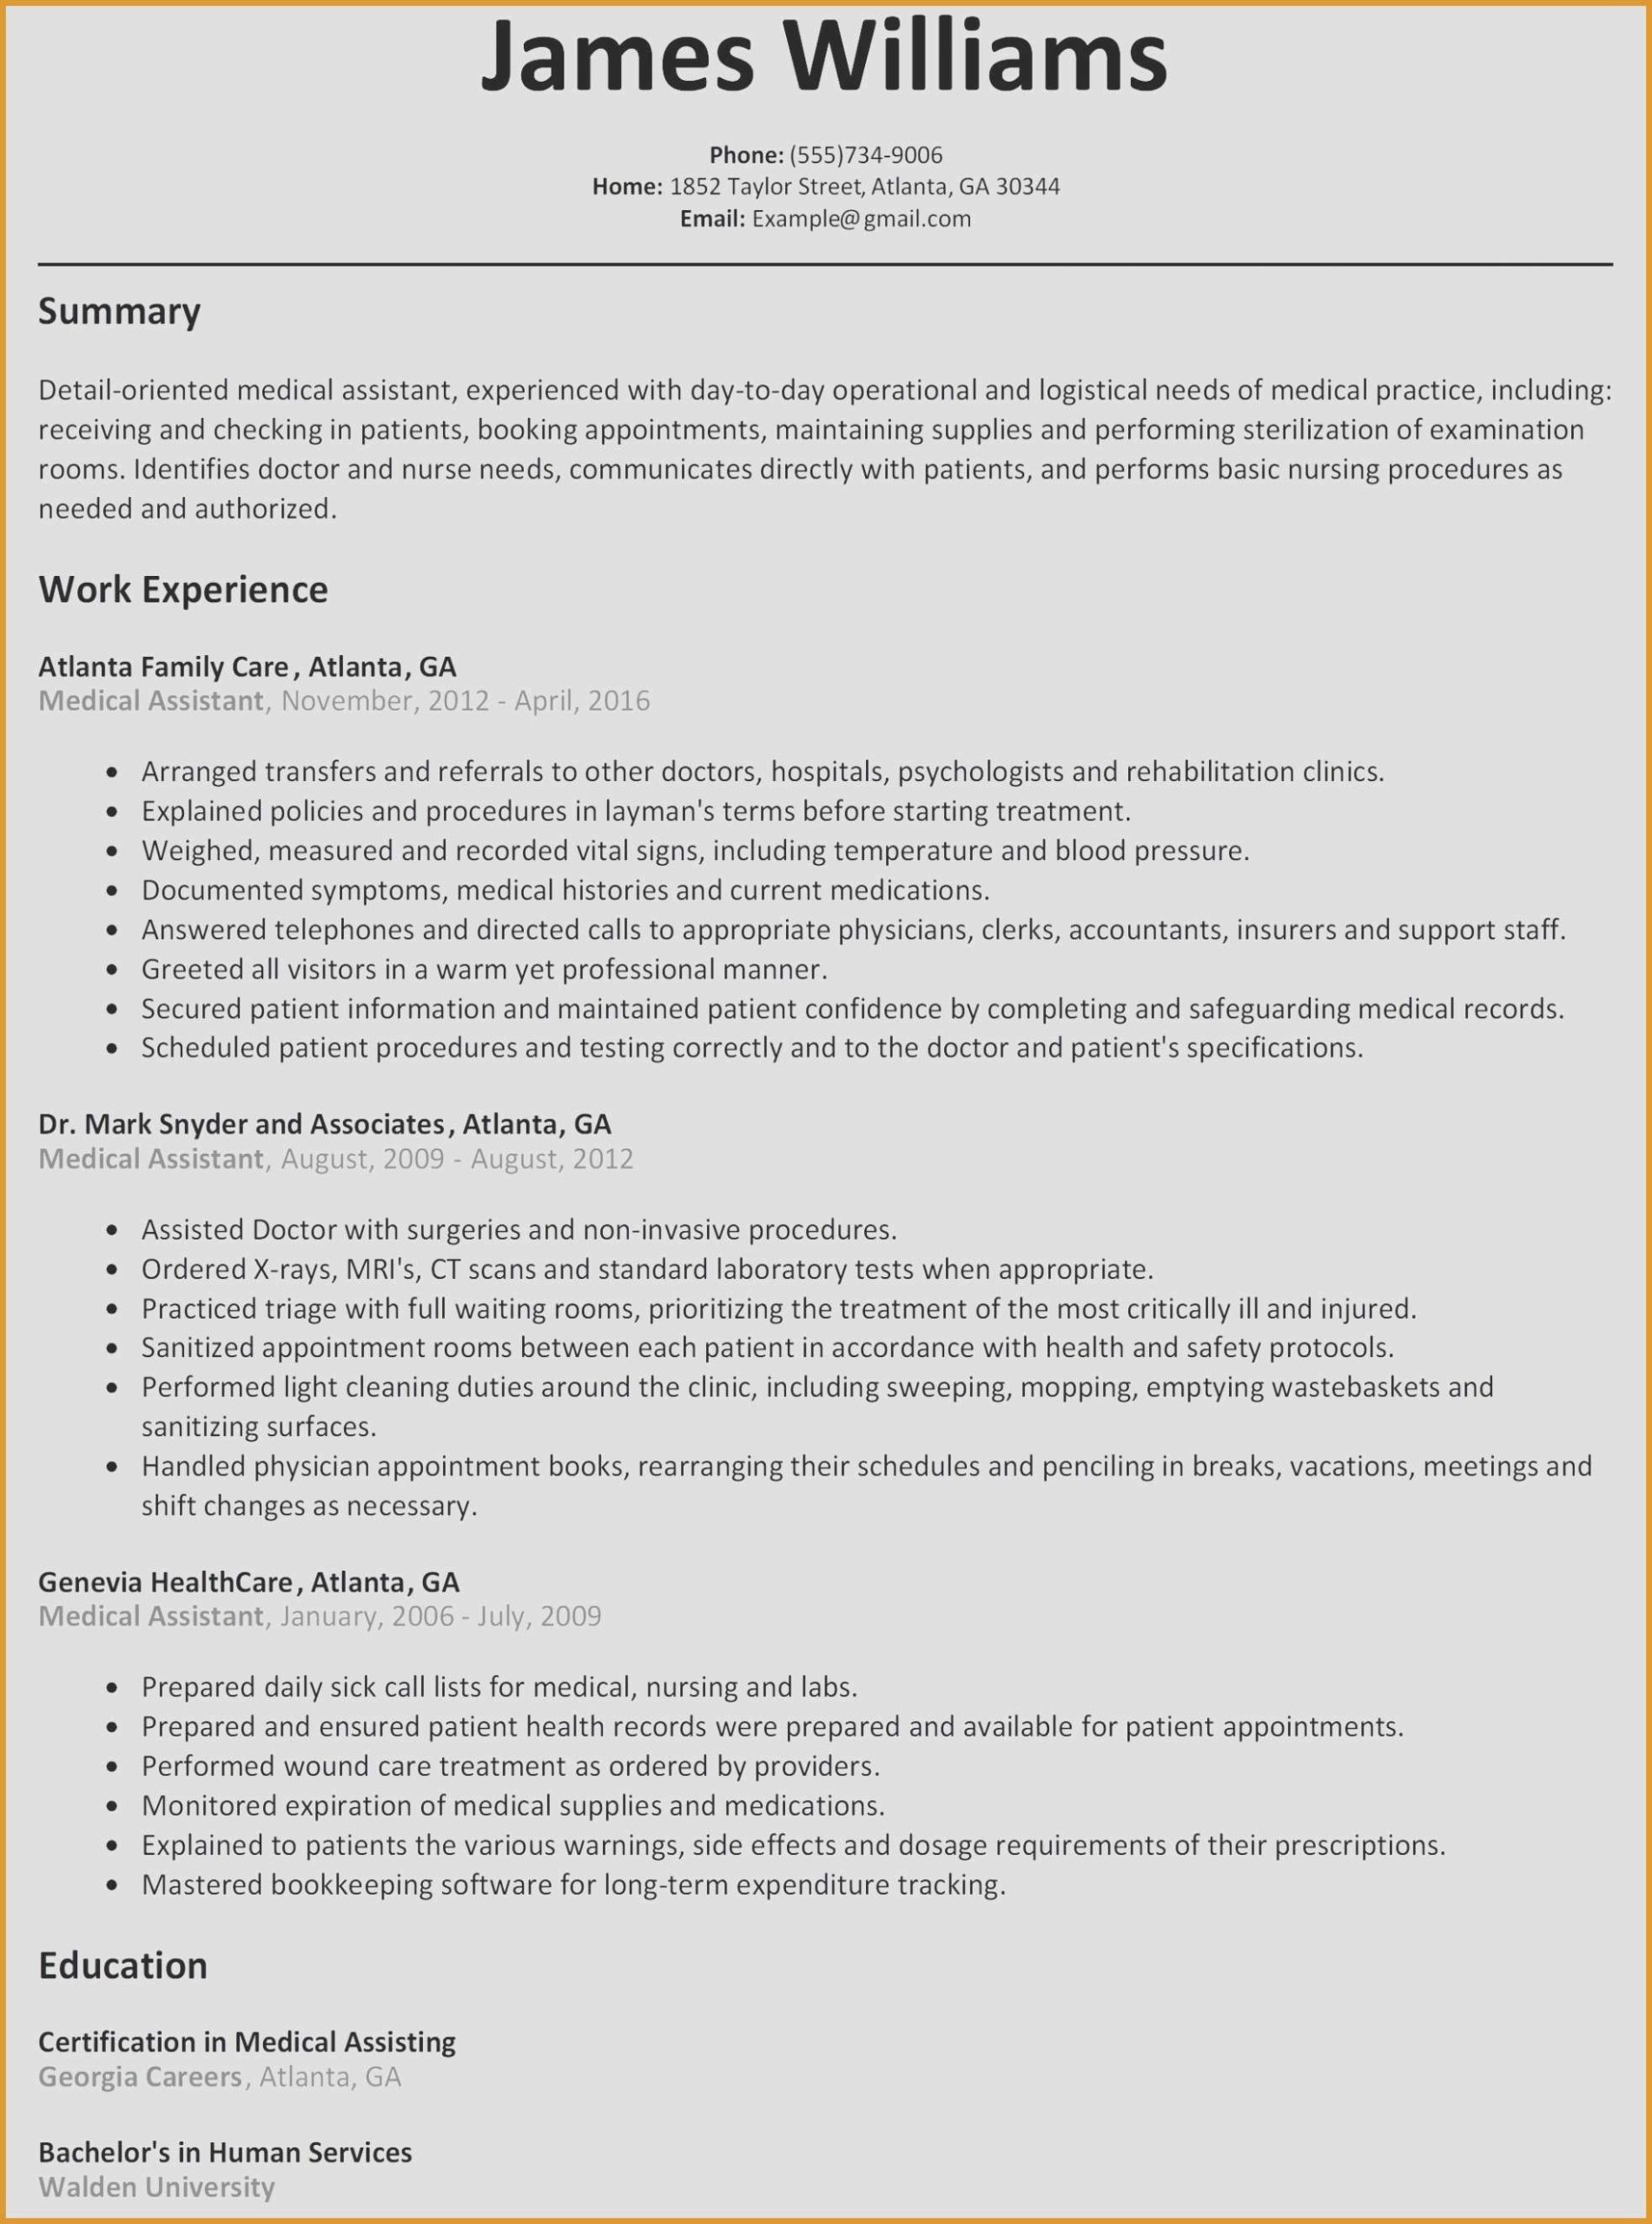 Sample Resume Objectives for Human Services Human Services Resume Objective – Cerel